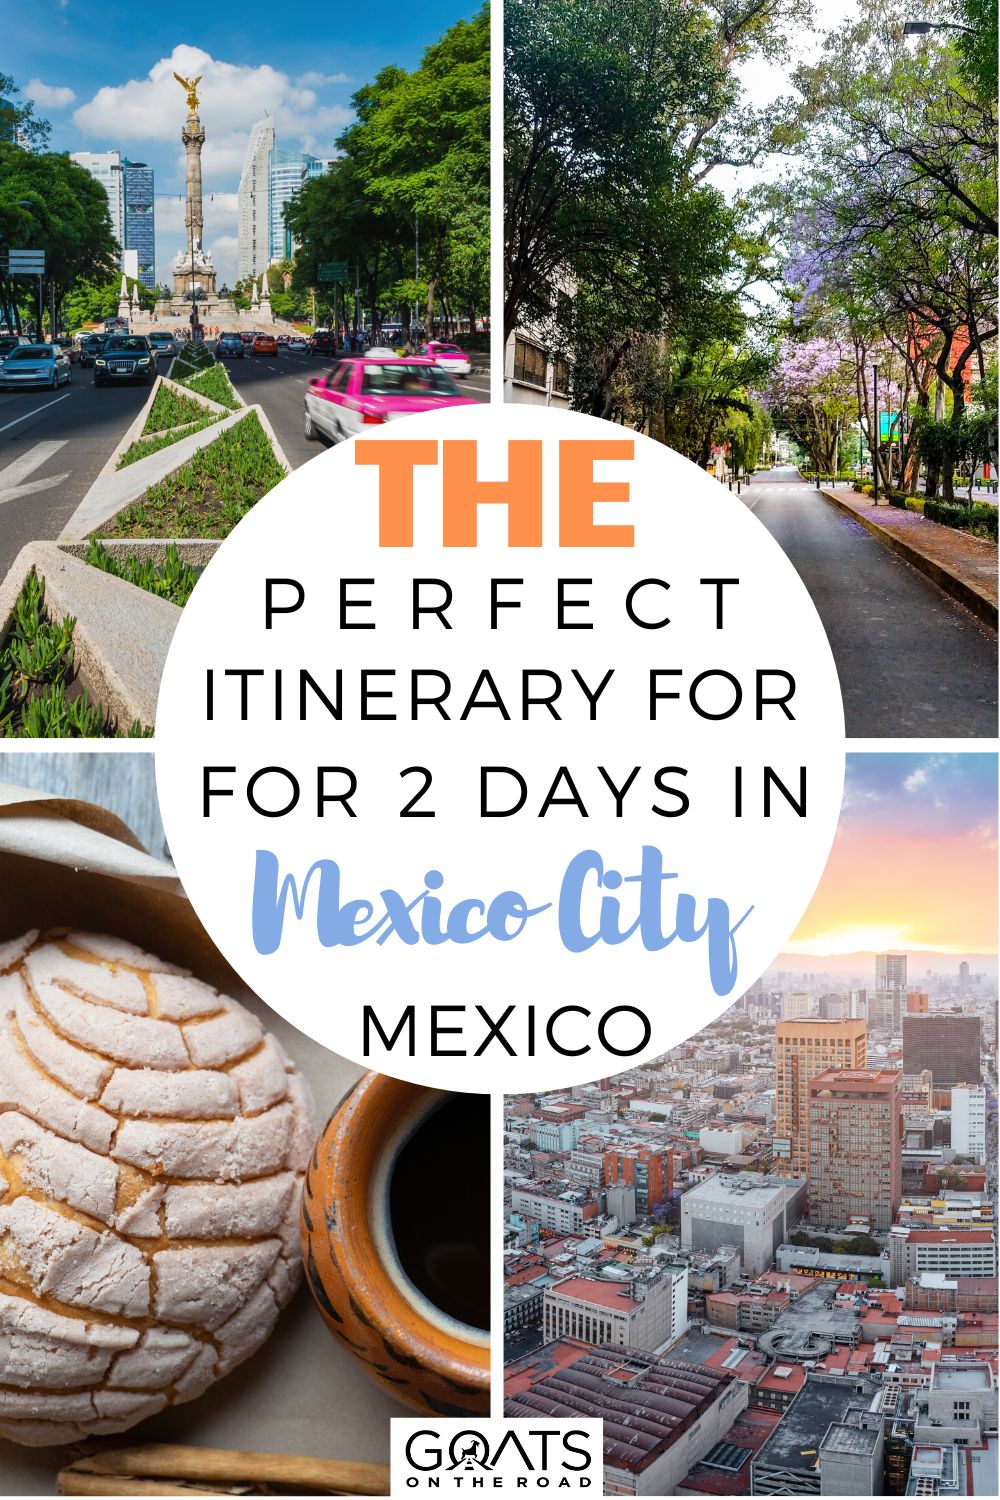 The Perfect Itinerary for 2 days in Mexico City, Mexico